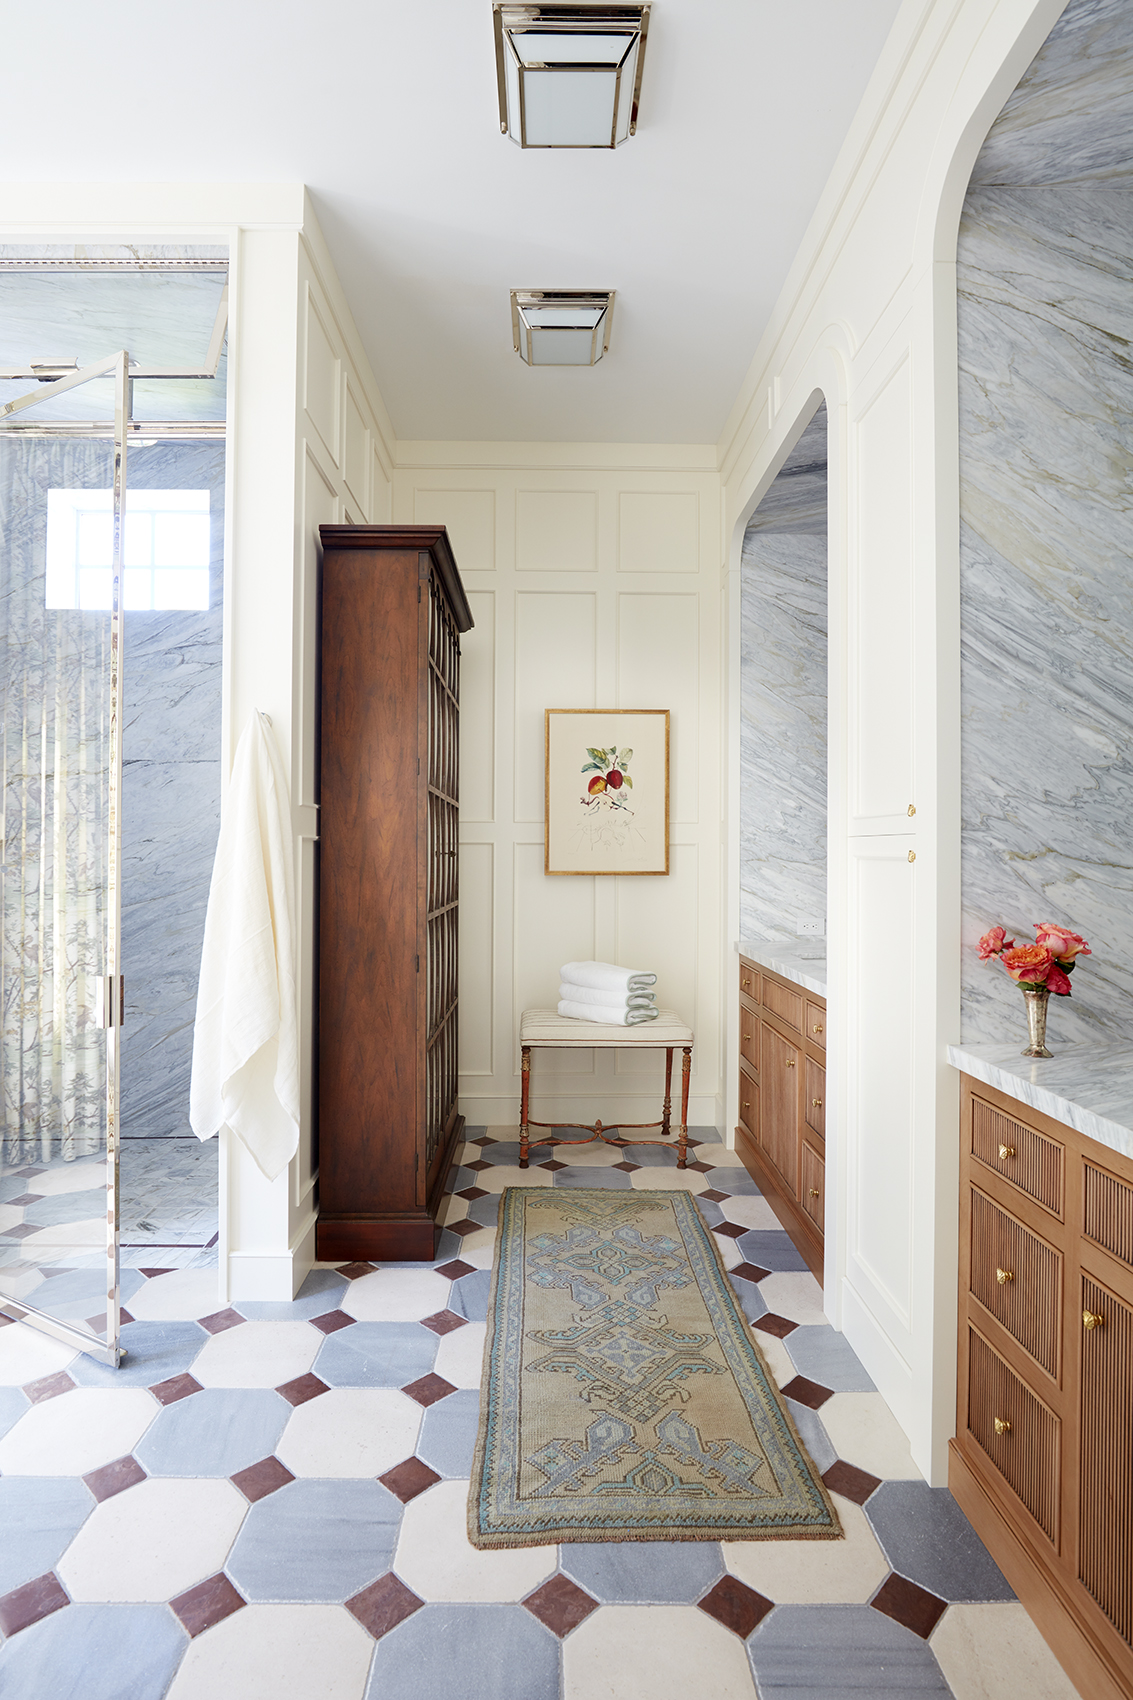 Bathroom design by Summer Thornton for a home in Naples, FL.